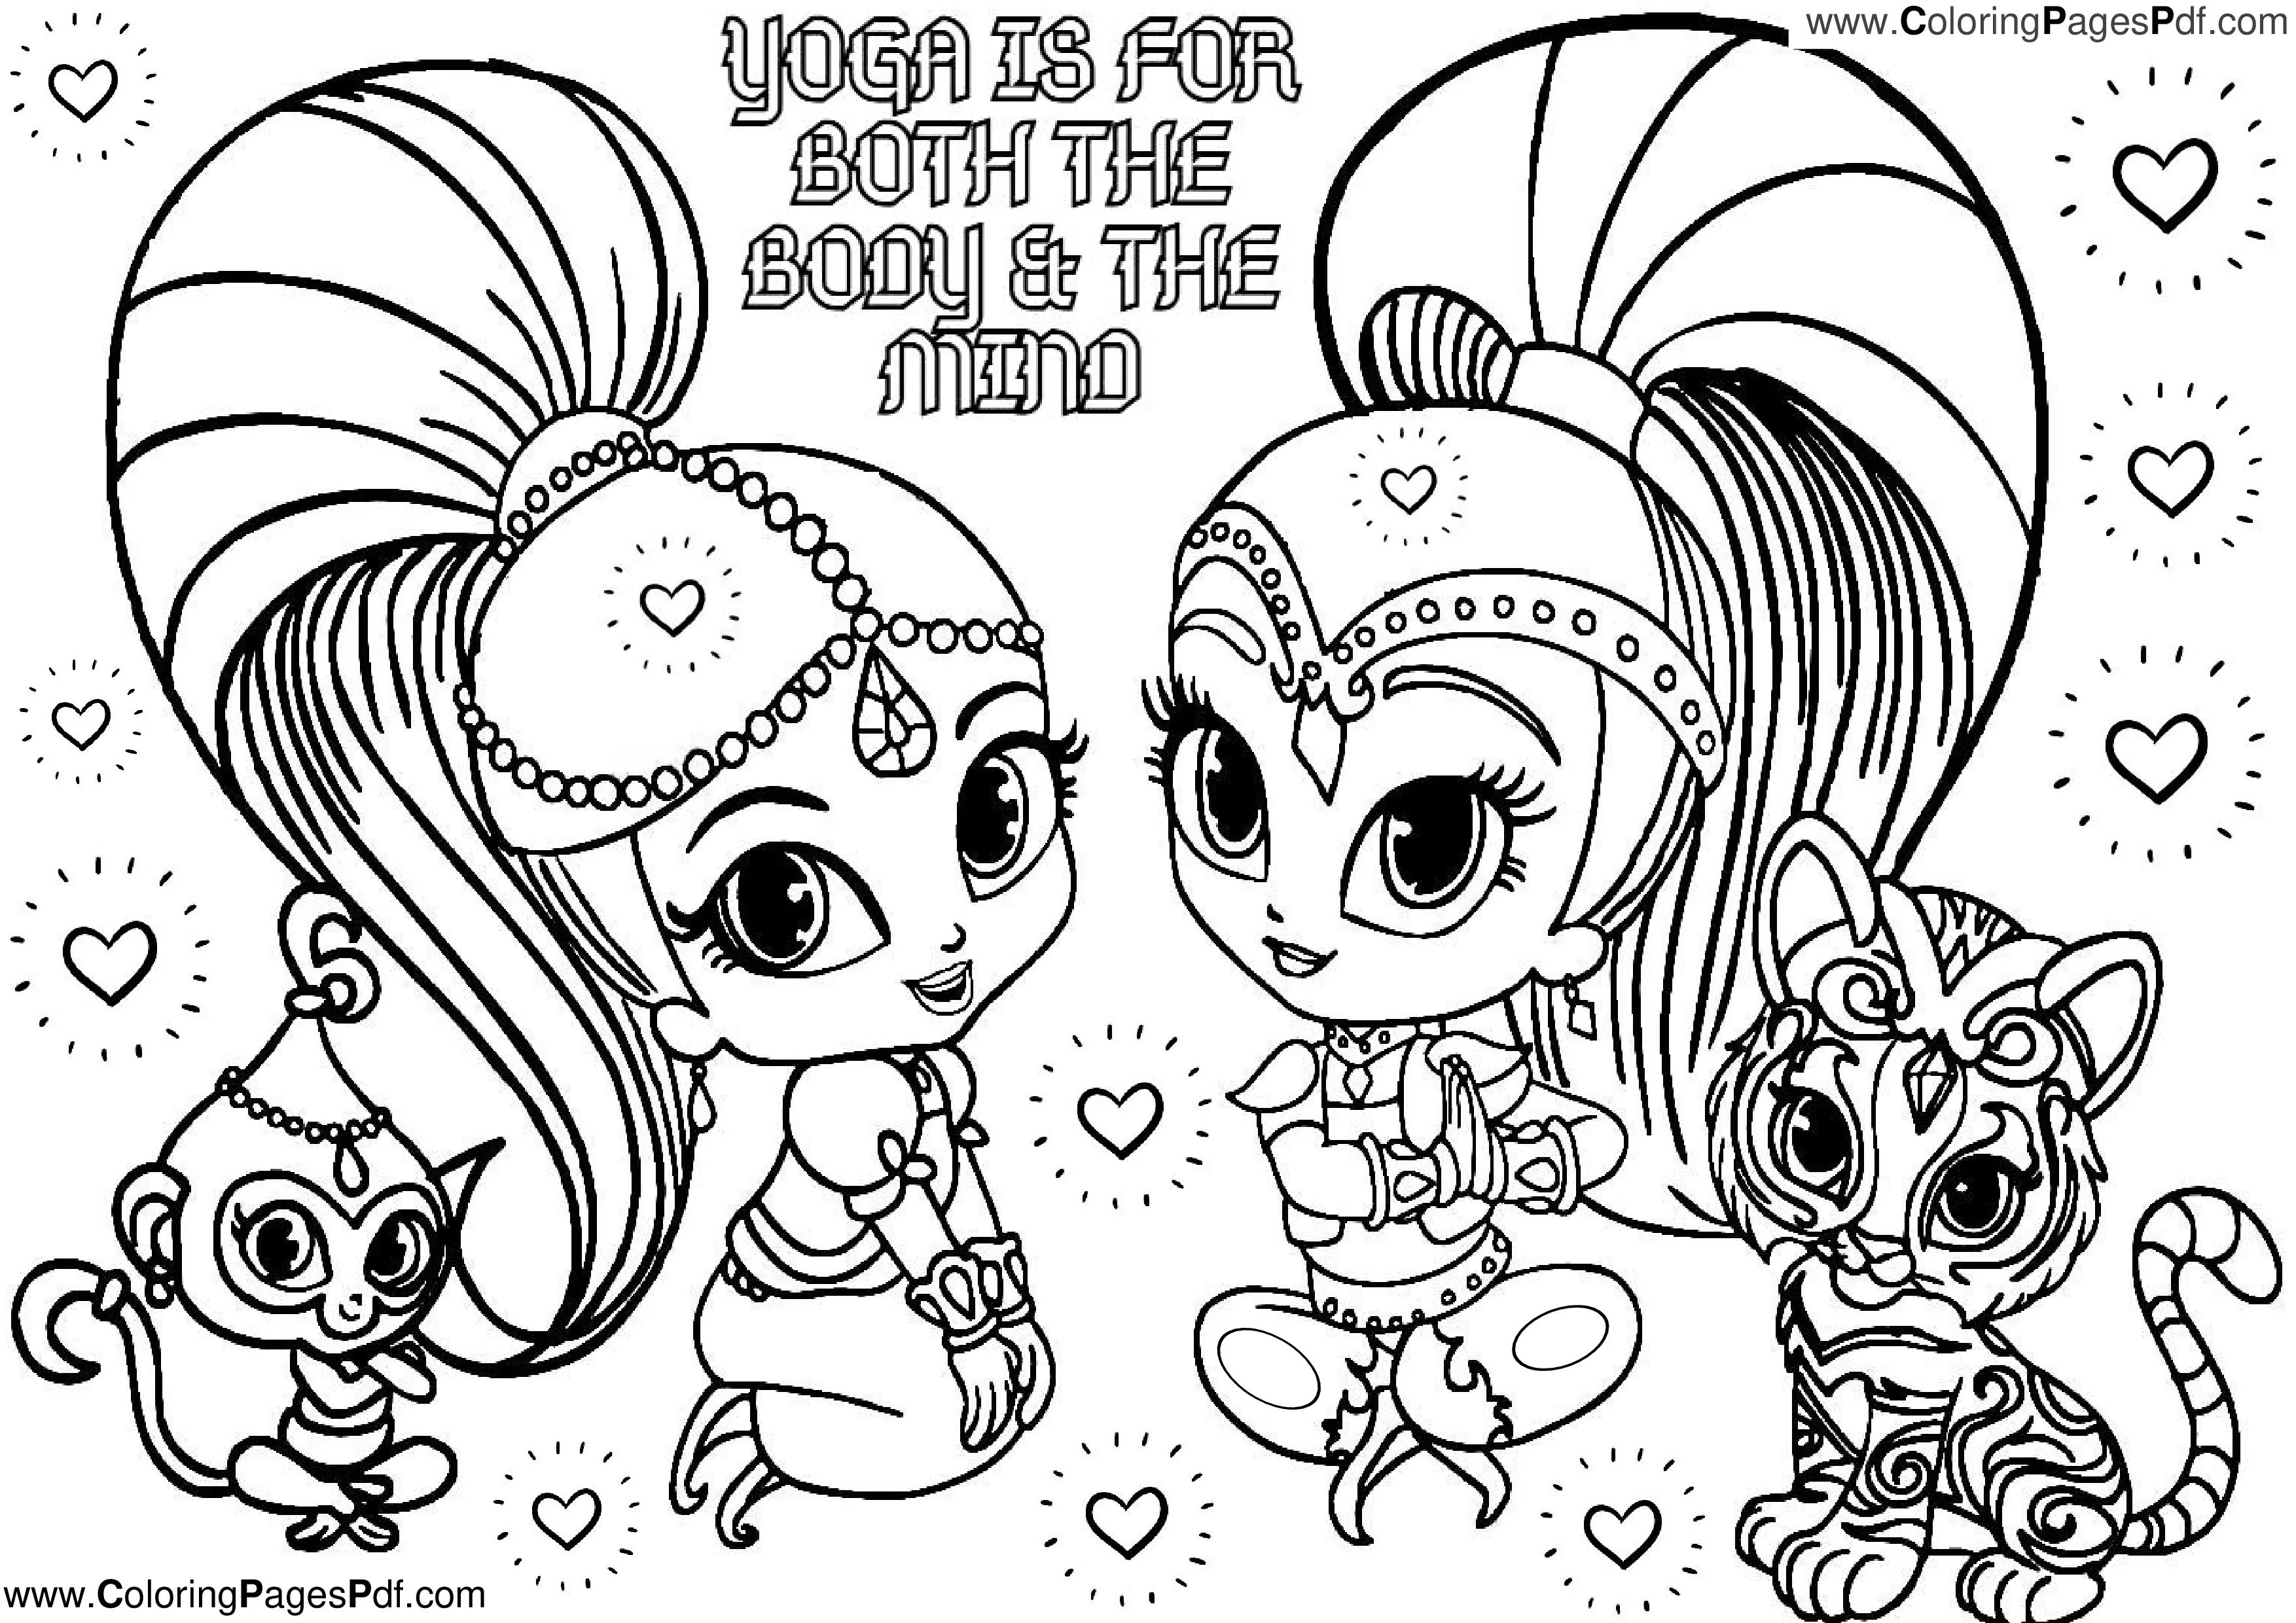 Shimmer and shine coloring book pdf